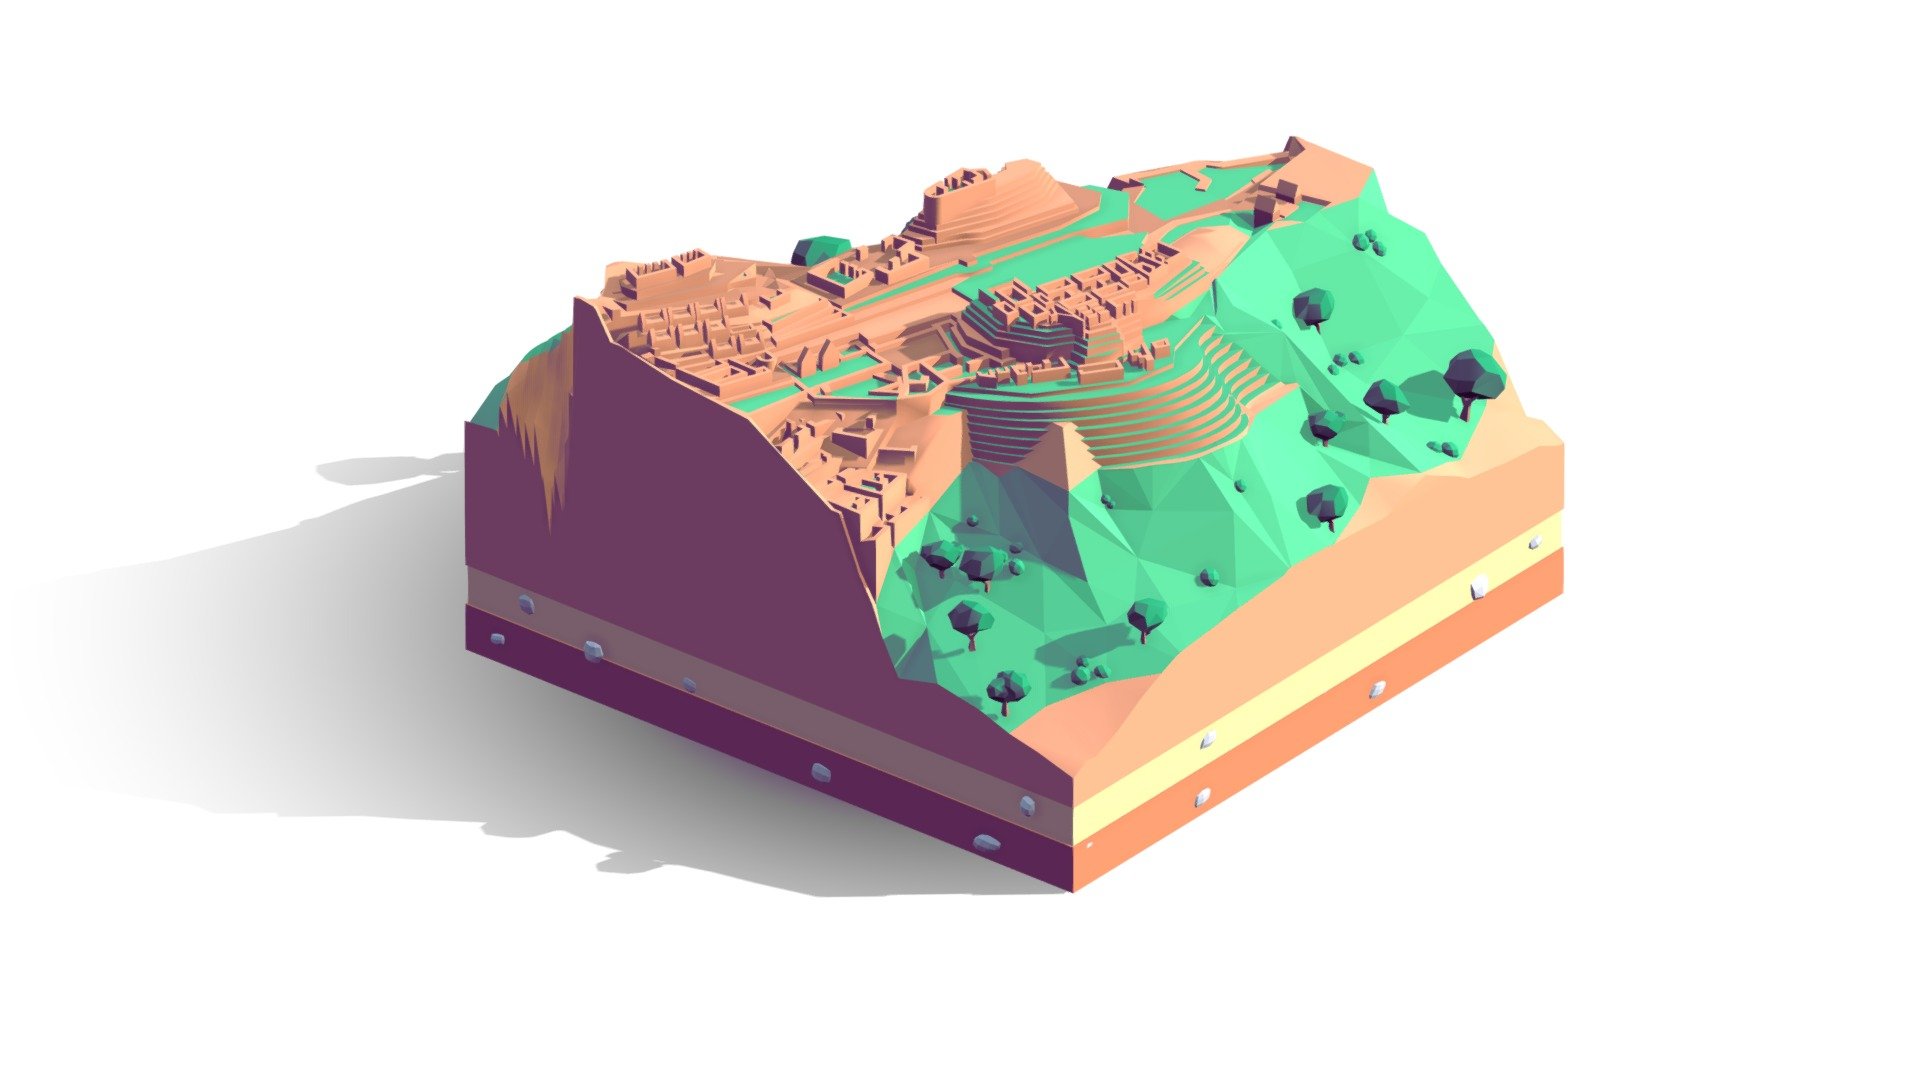 Cartoon Lowpoly Monument Valley Landmark

Created on Cinema 4d R20 

14 874 Polygons

Procedural textured

Game Ready, AR Ready, VR Ready

Include Monument, trees, landscape.
 - Cartoon Low Poly Machu Piccphu Landmark - Buy Royalty Free 3D model by antonmoek 3d model